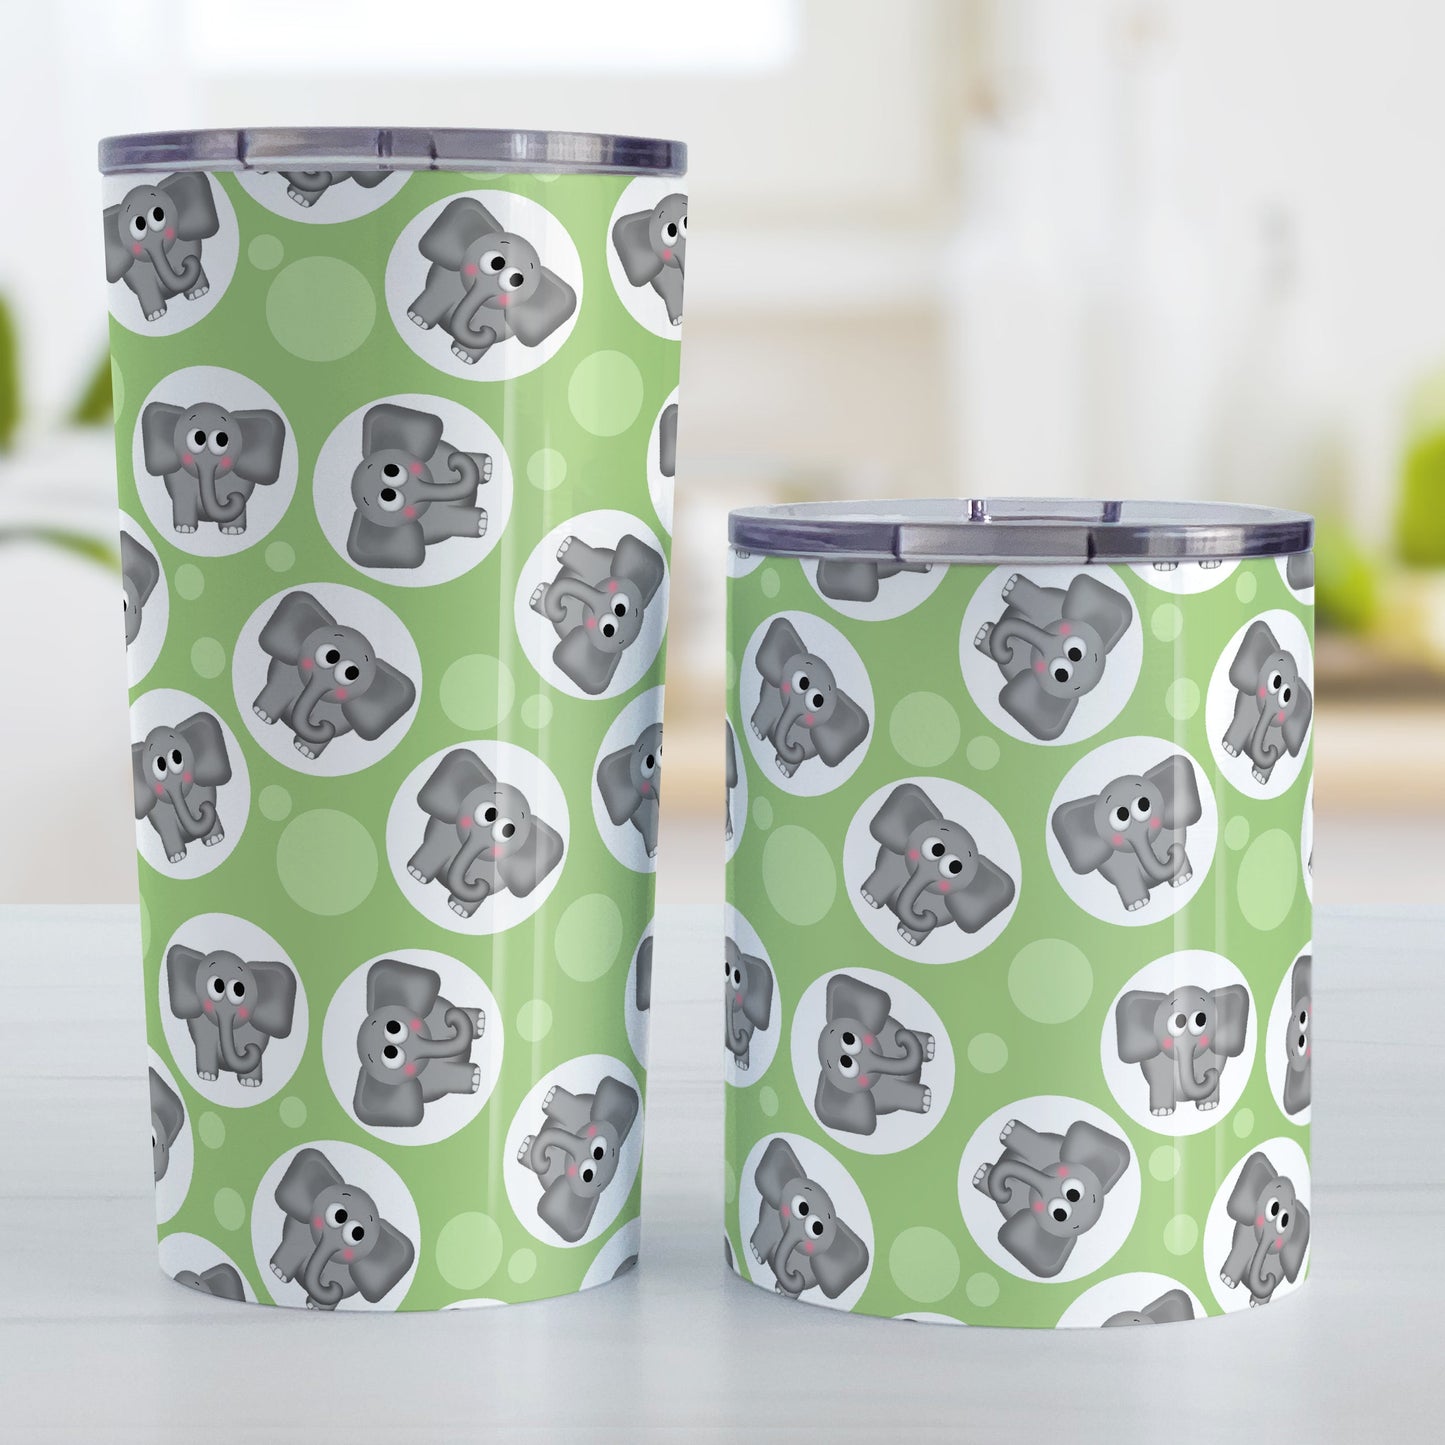 Cute Green Elephant Pattern Tumbler Cup (20oz and 10oz, stainless steel insulated) at Amy's Coffee Mugs